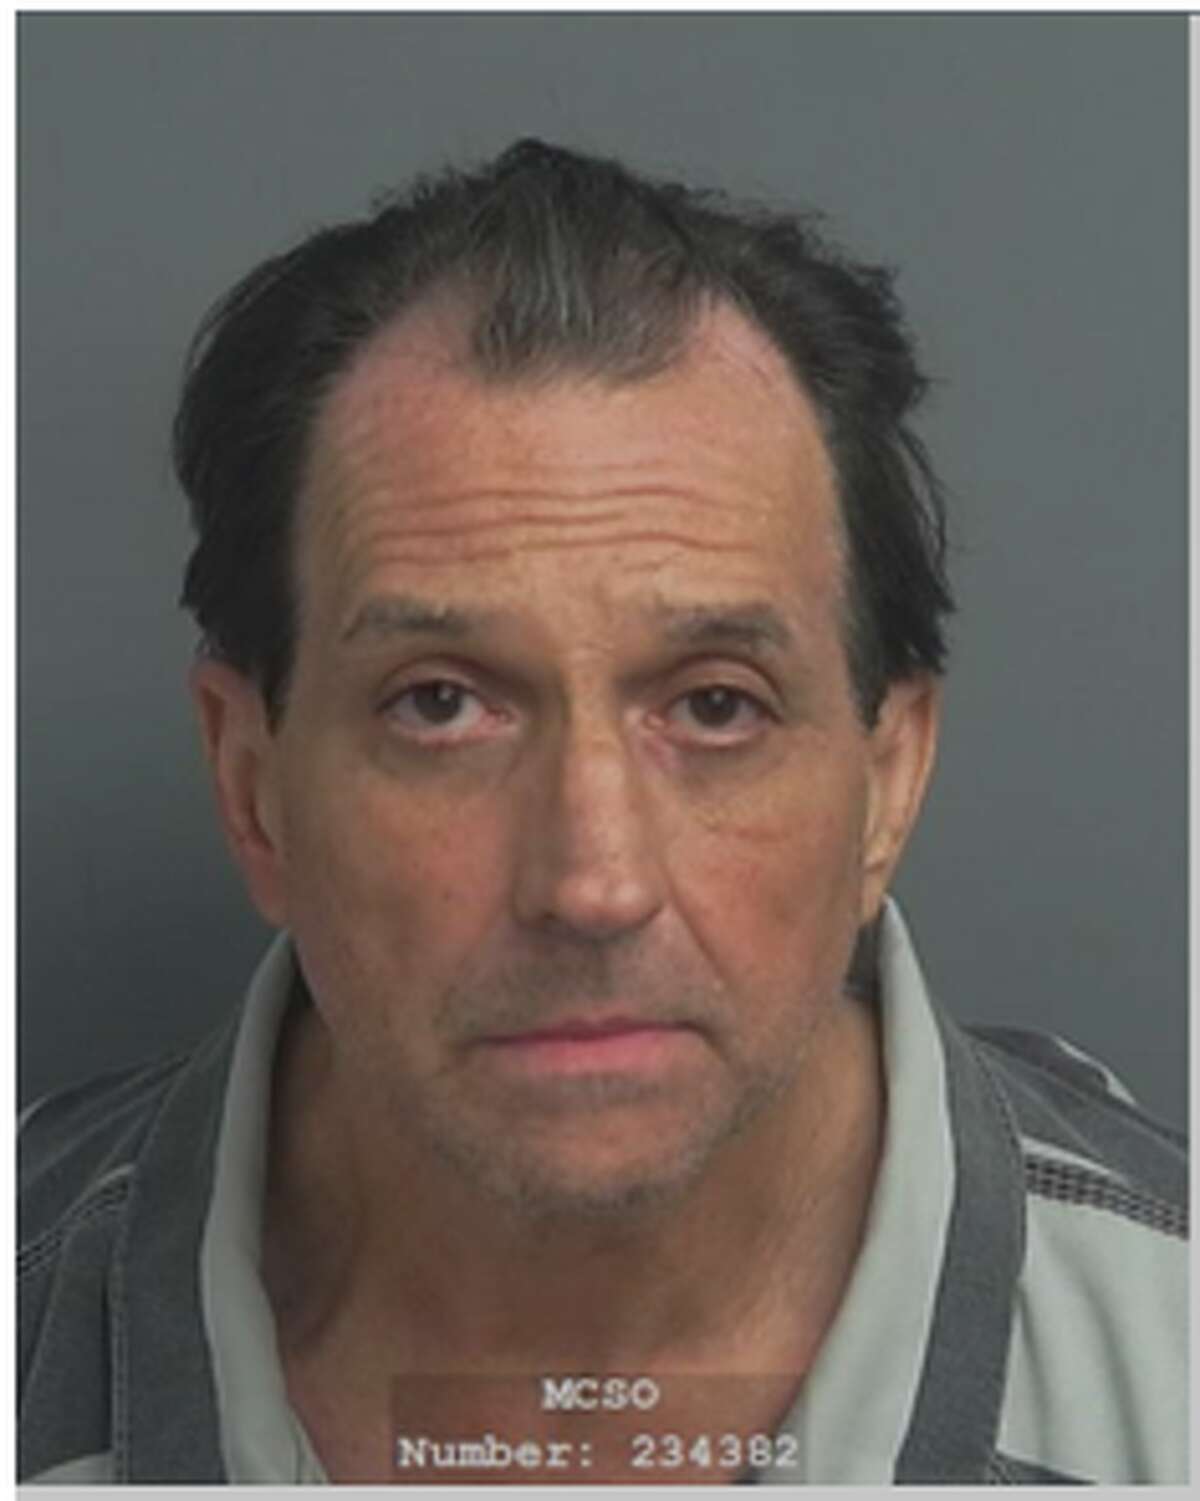 Robert Alan Cordray, 56, was sentenced to life in prison on July 16, 2019 following his conviction for stealing from a Conroe bank's ATMs in 2018.